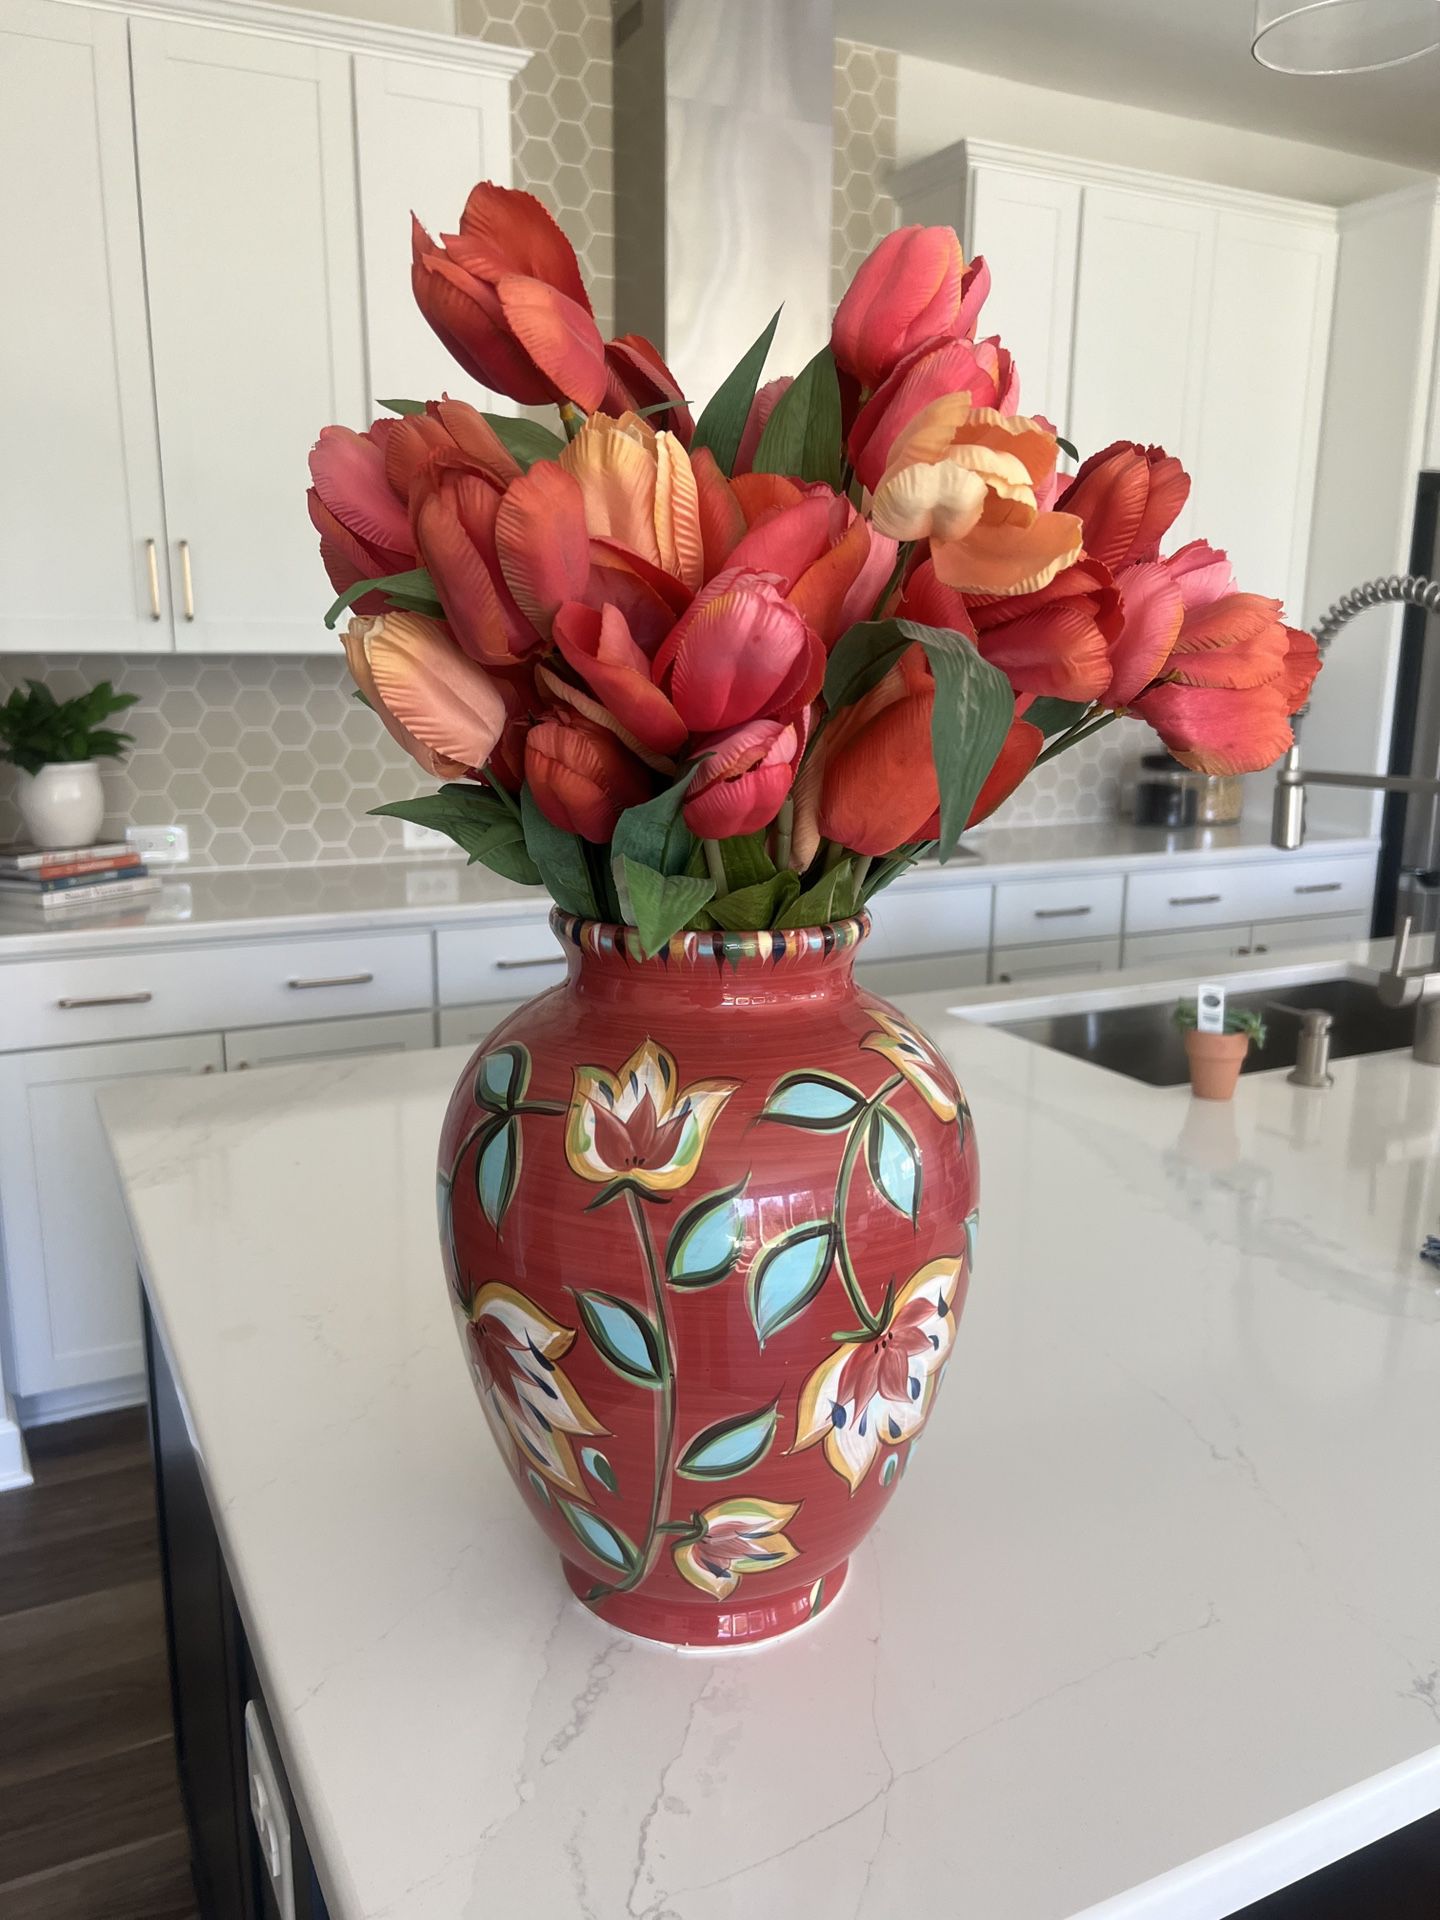 Gorgeous Southern Loving Vase With Artificial Flowers Home Decor Accent Piece